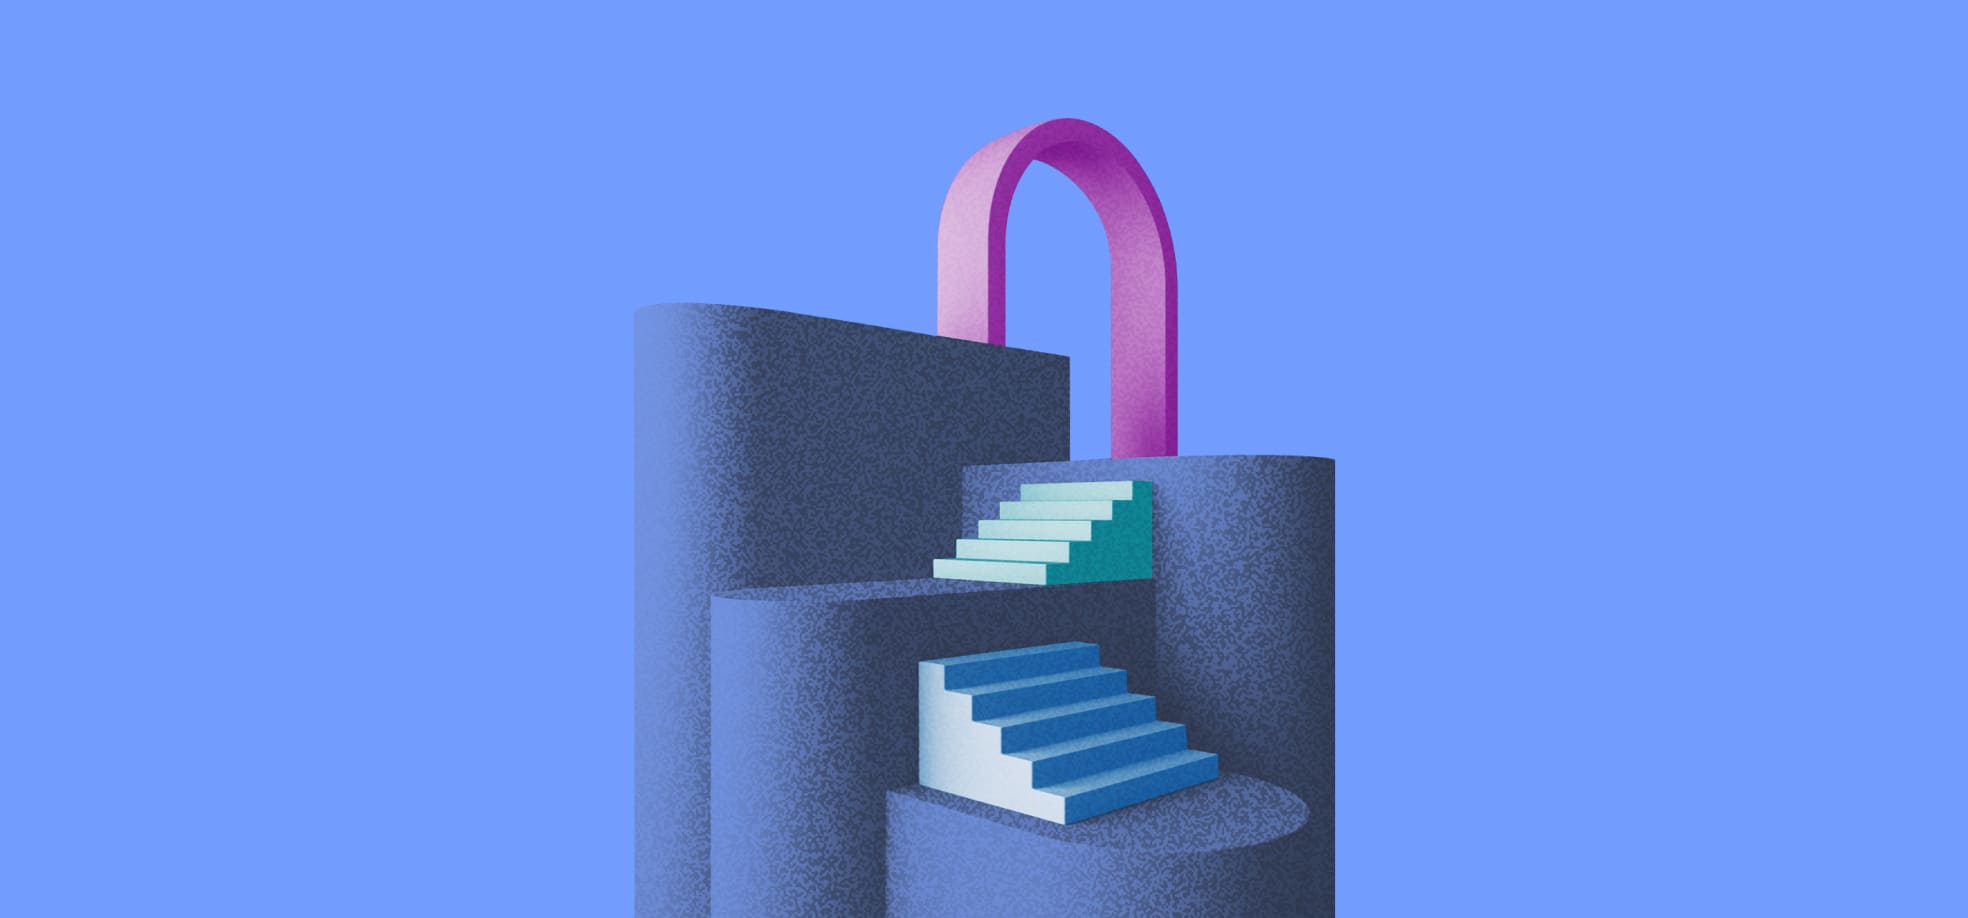 Ladders and arch illustration